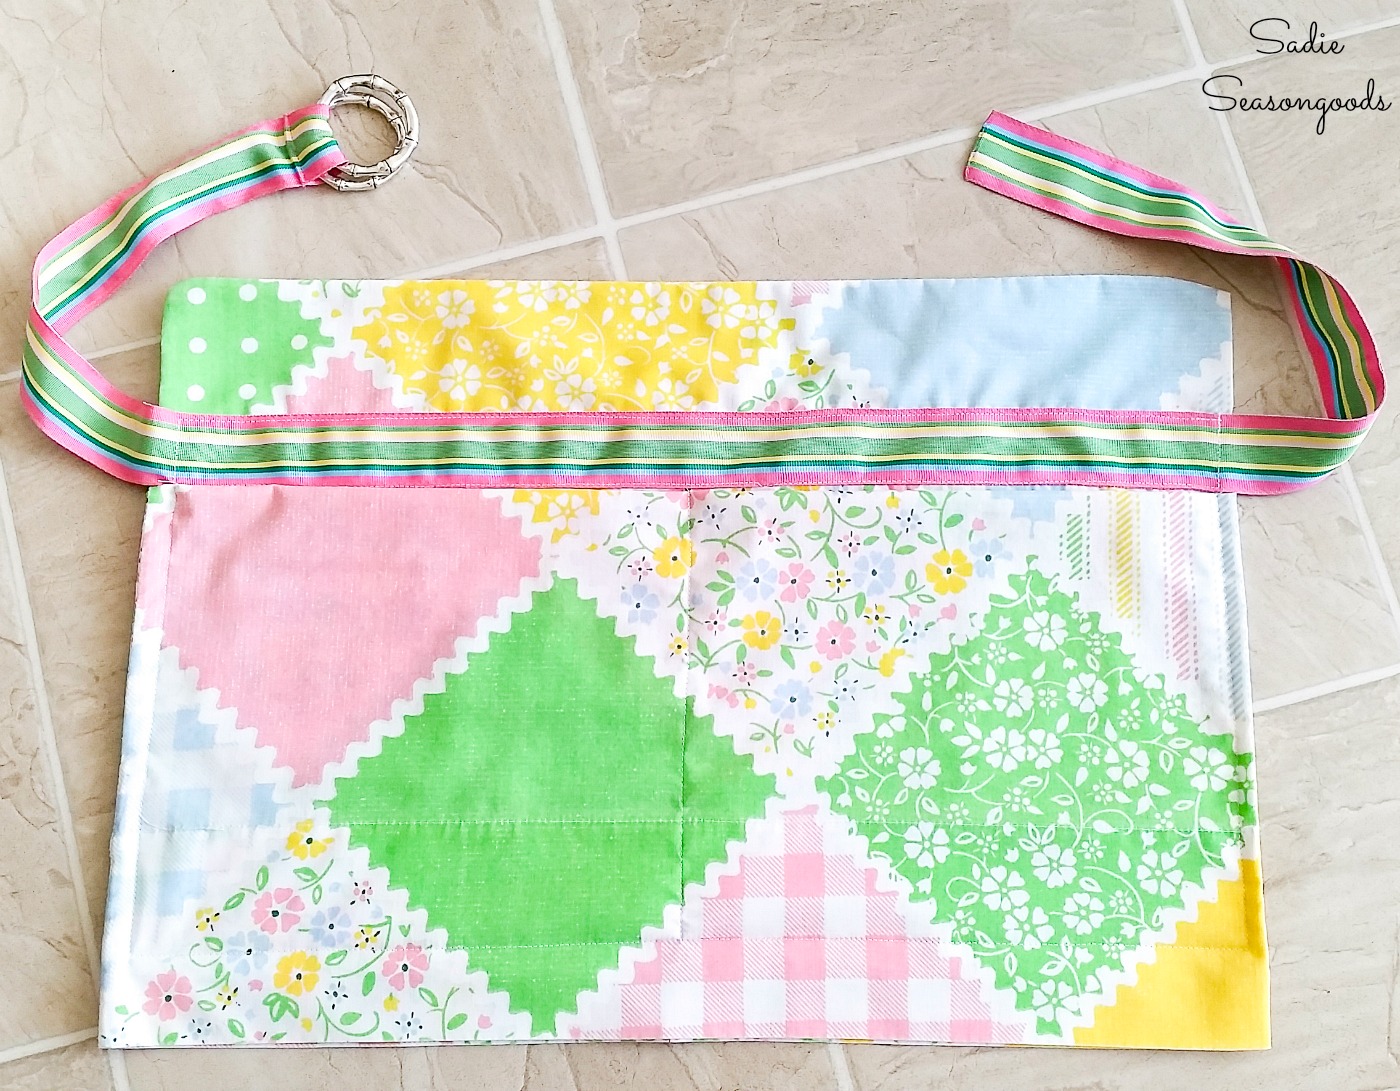 Waist apron with a ribbon belt and vintage pillowcases